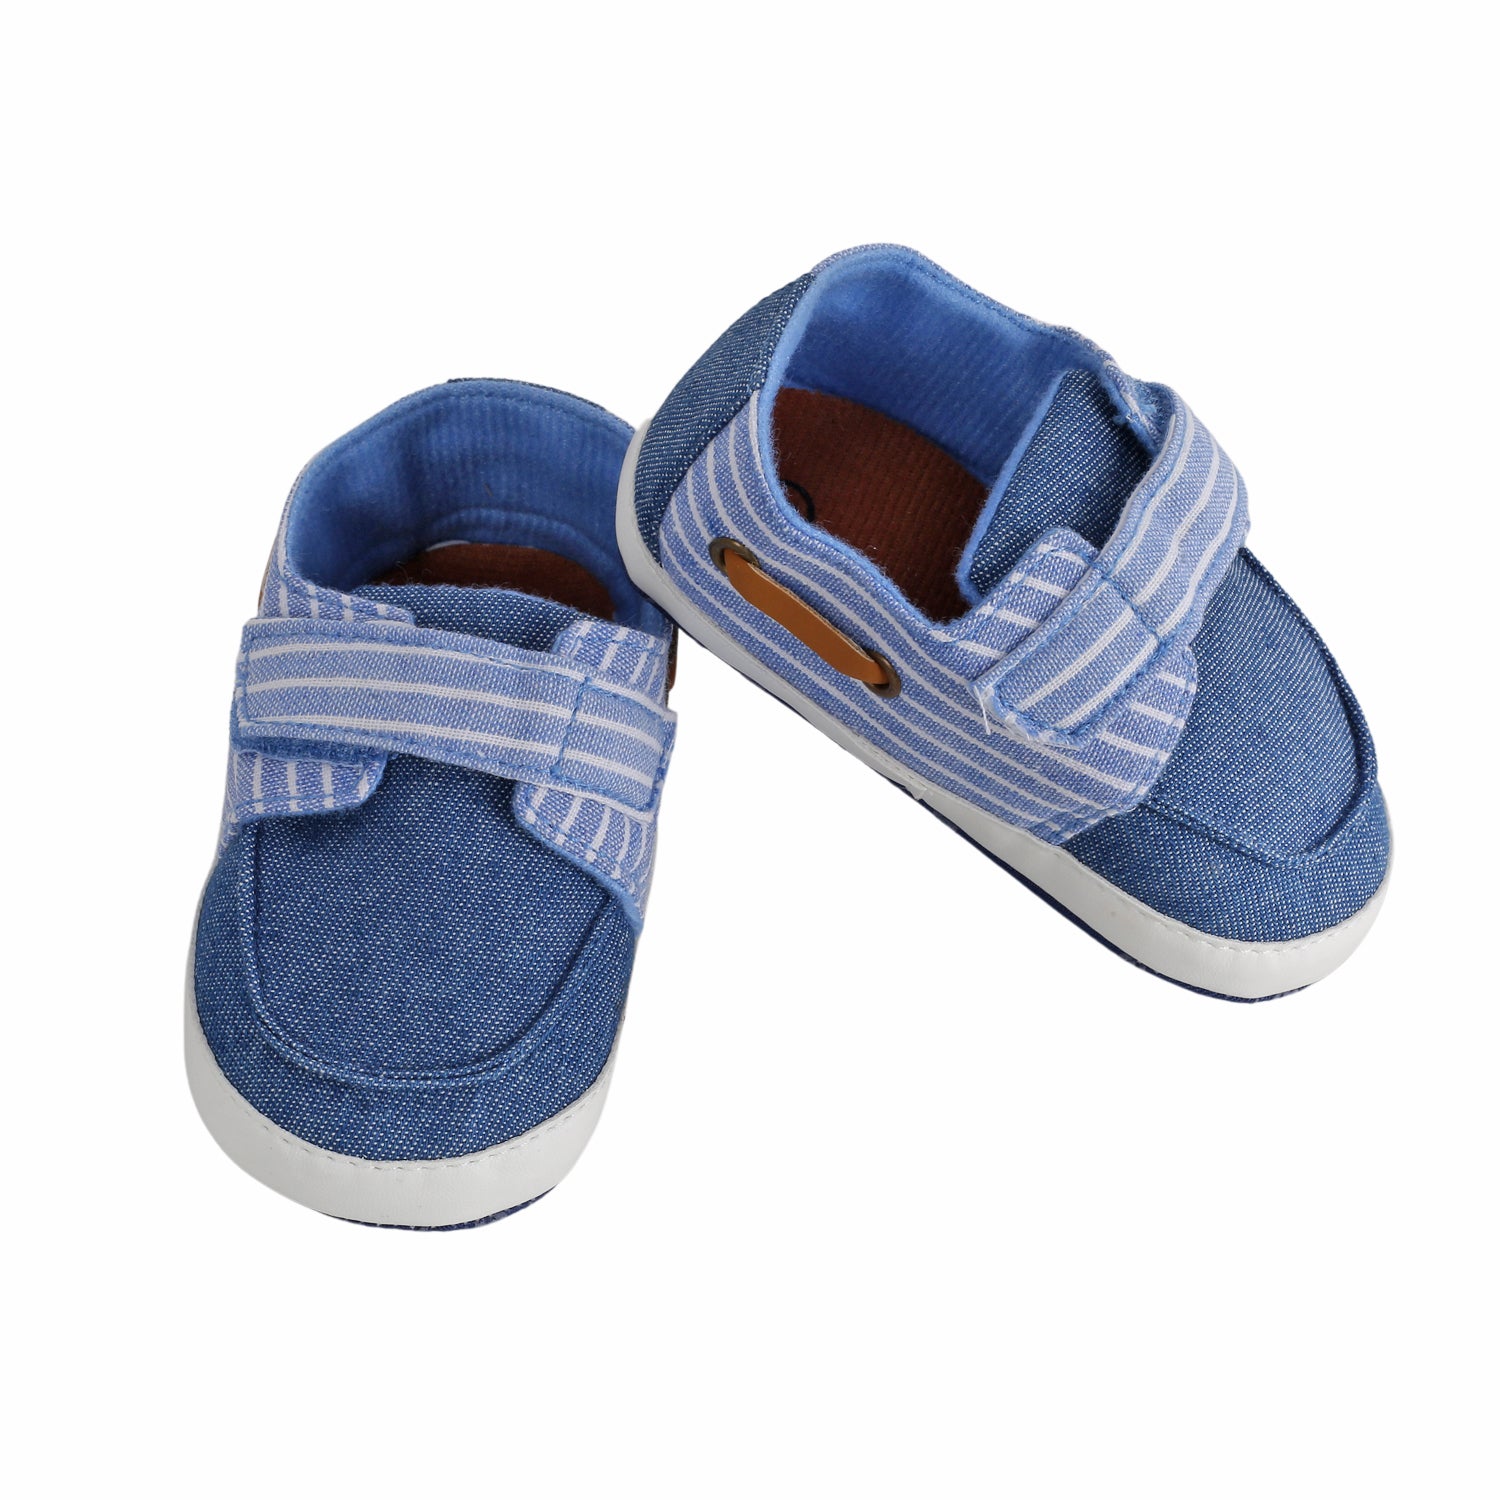 Baby Moo Striped Blue Velcro Booties - Baby Moo